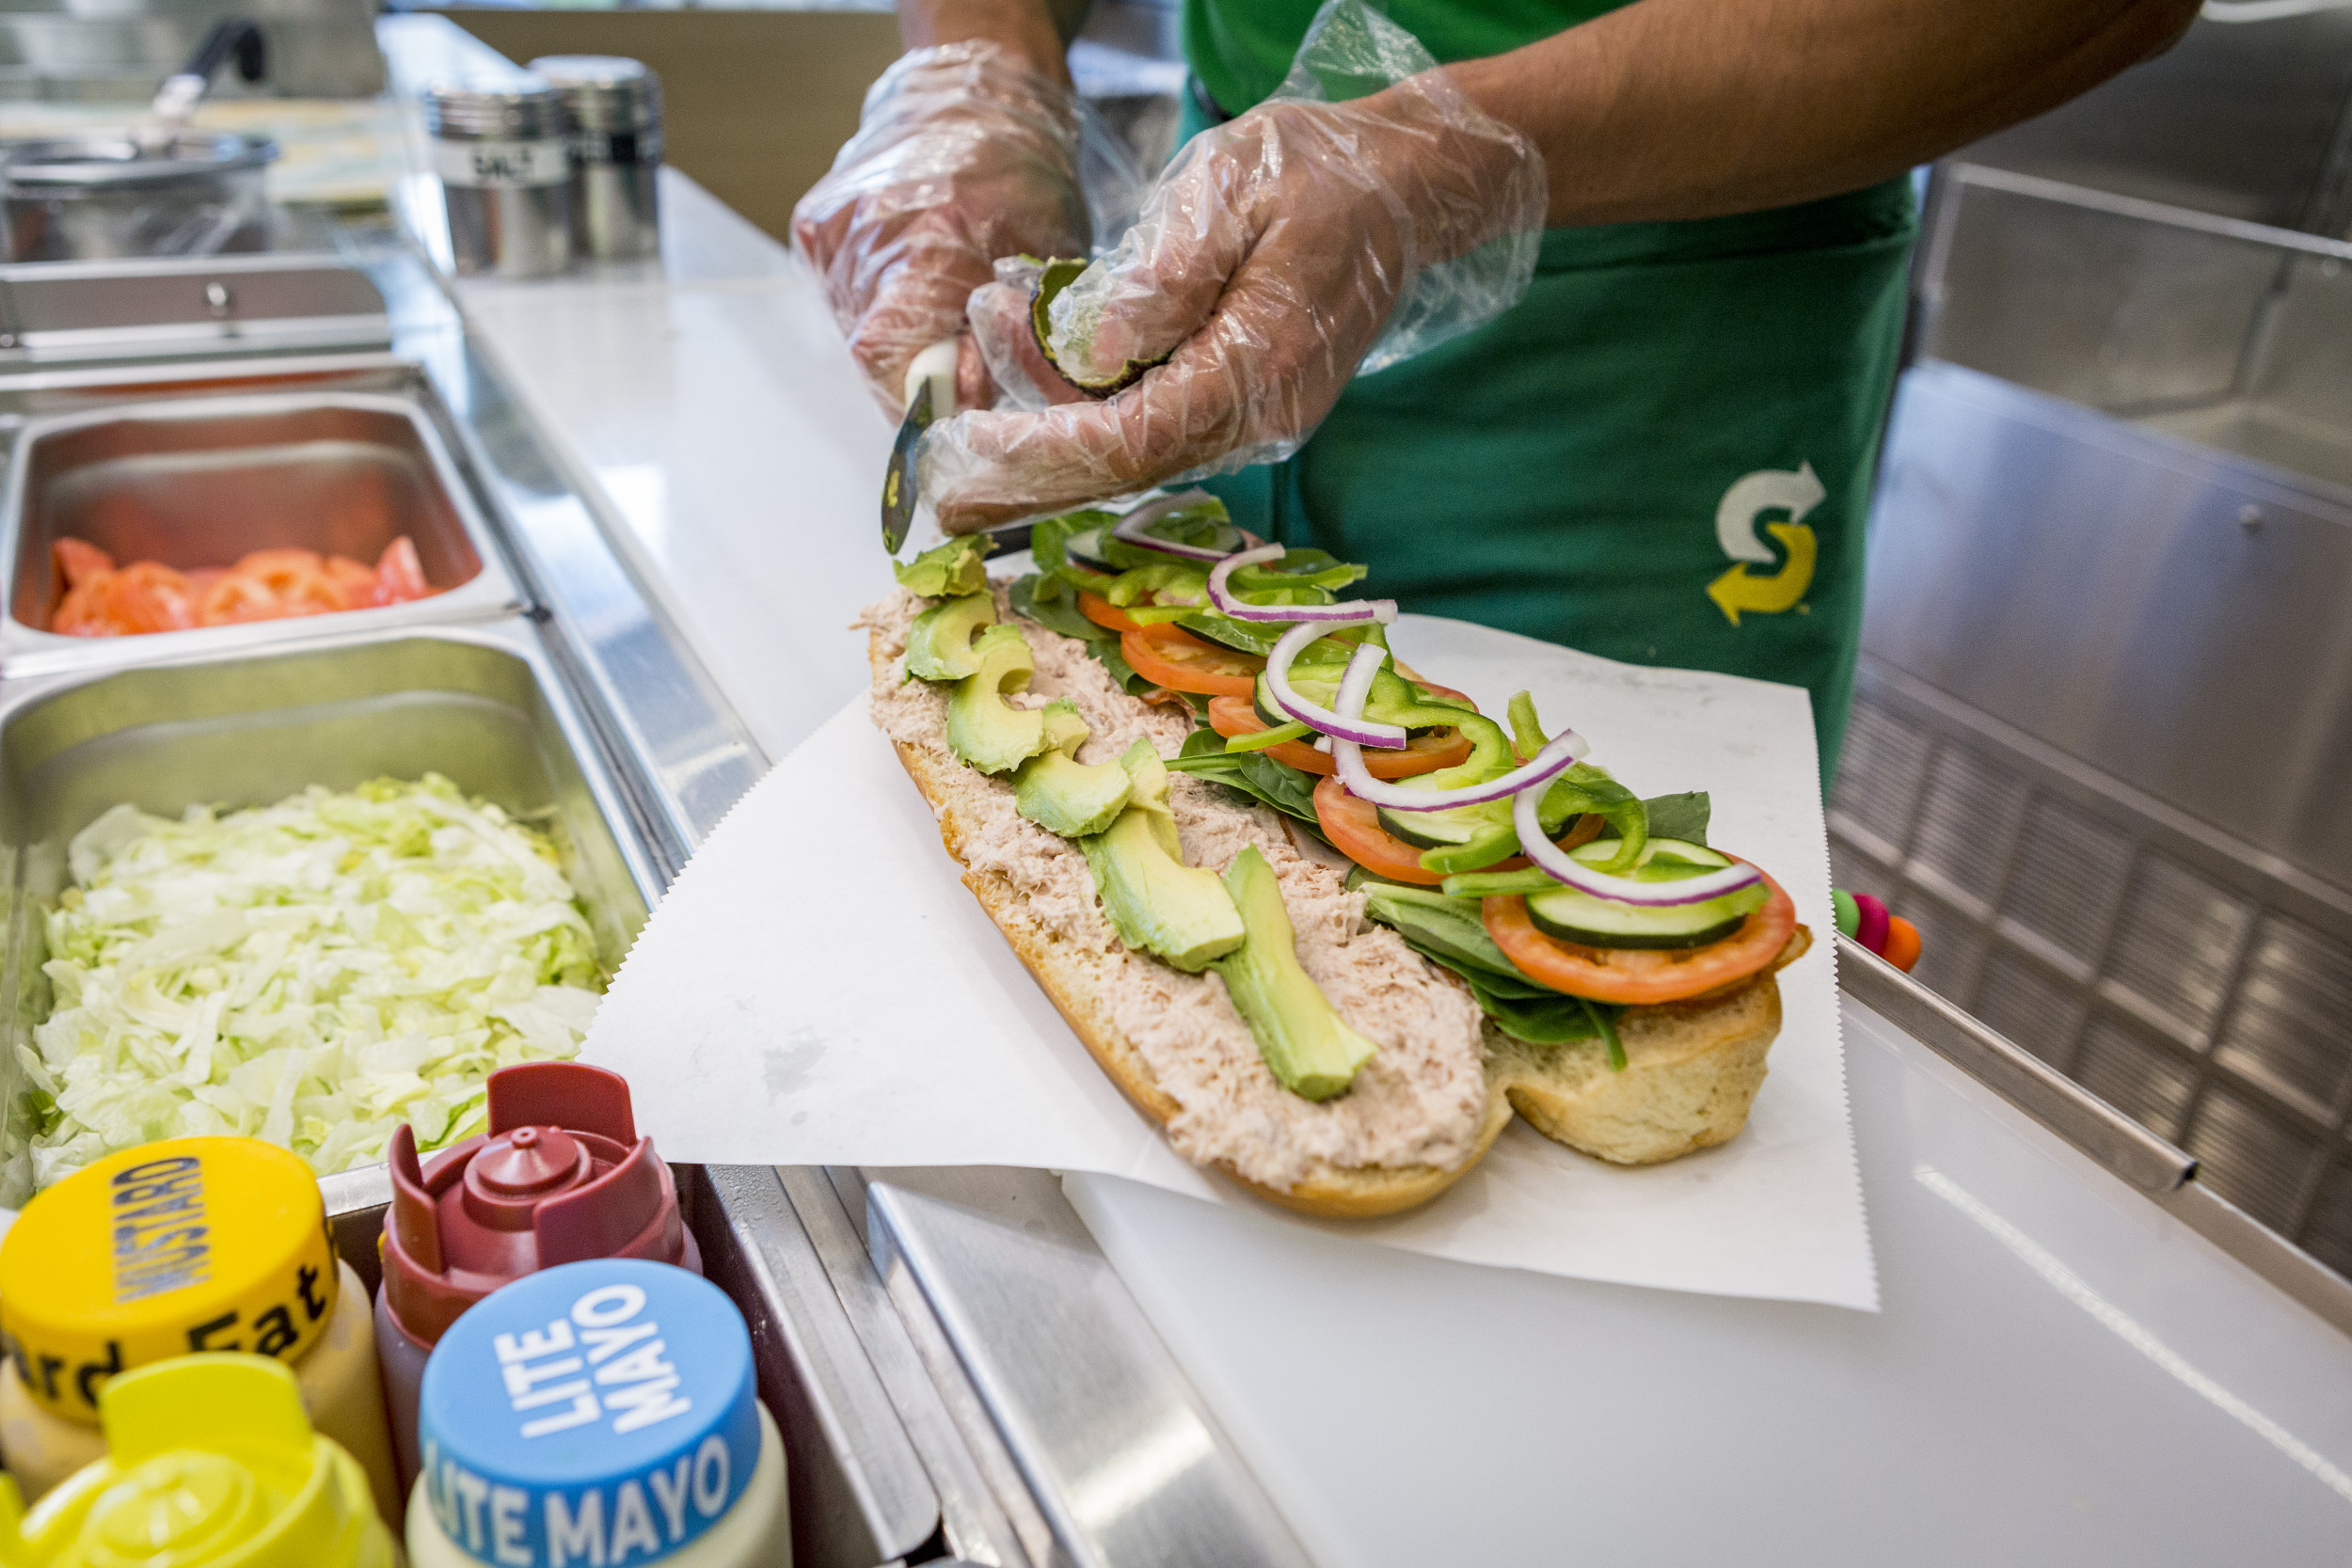 Subway superfan gets free subs for life after getting footlong tattoo